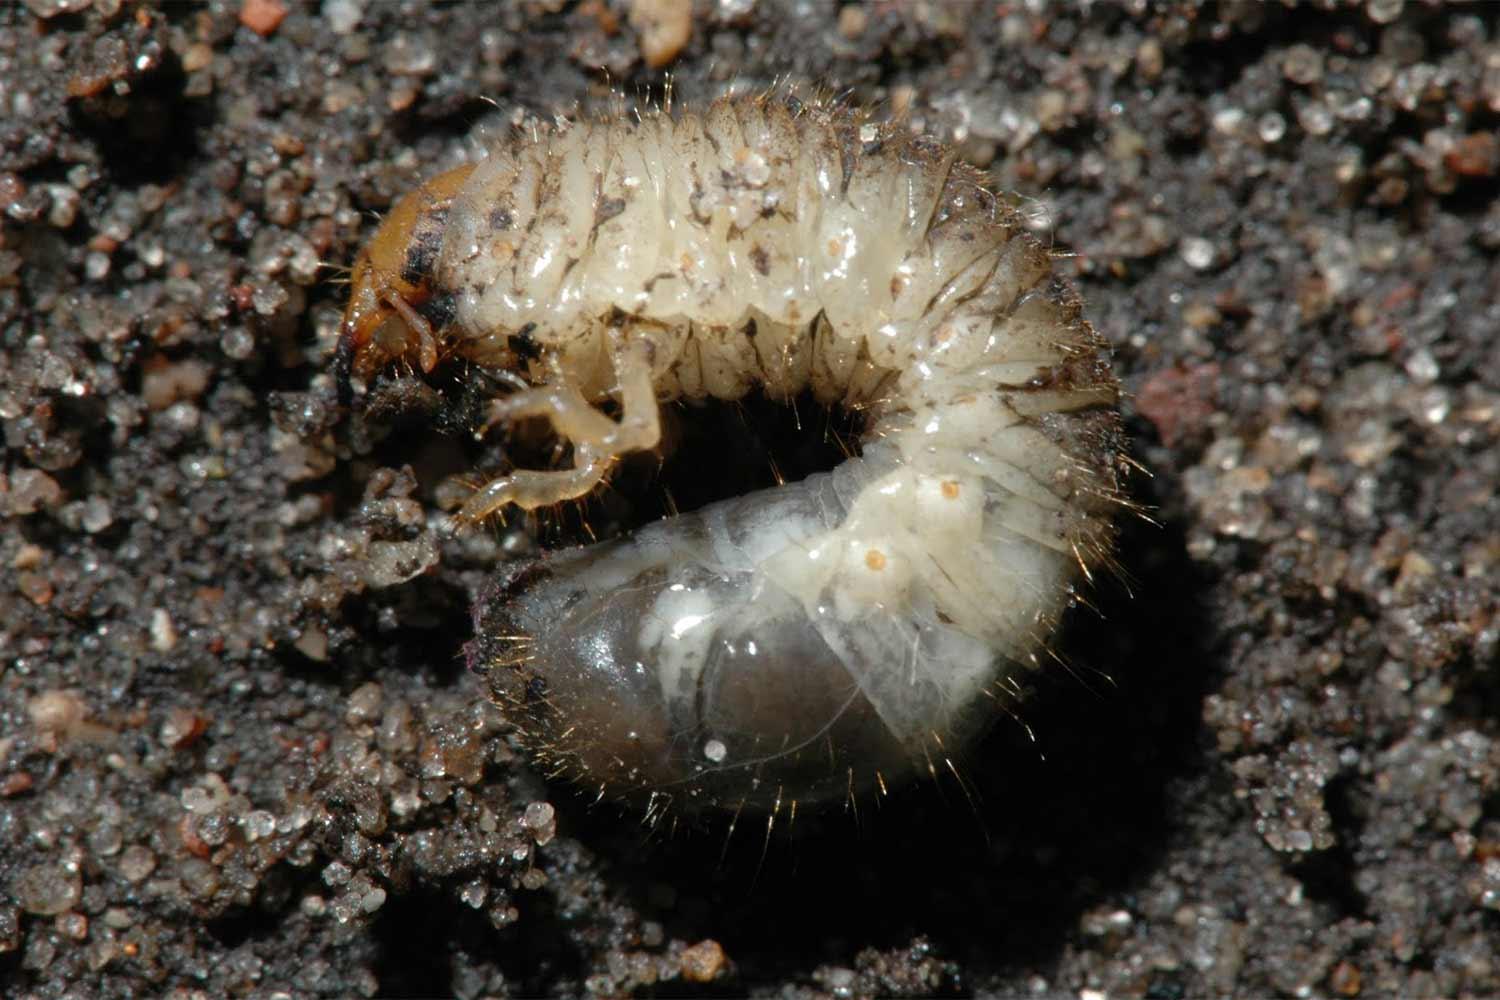 Translucent milky white beetle larva in the dirt.